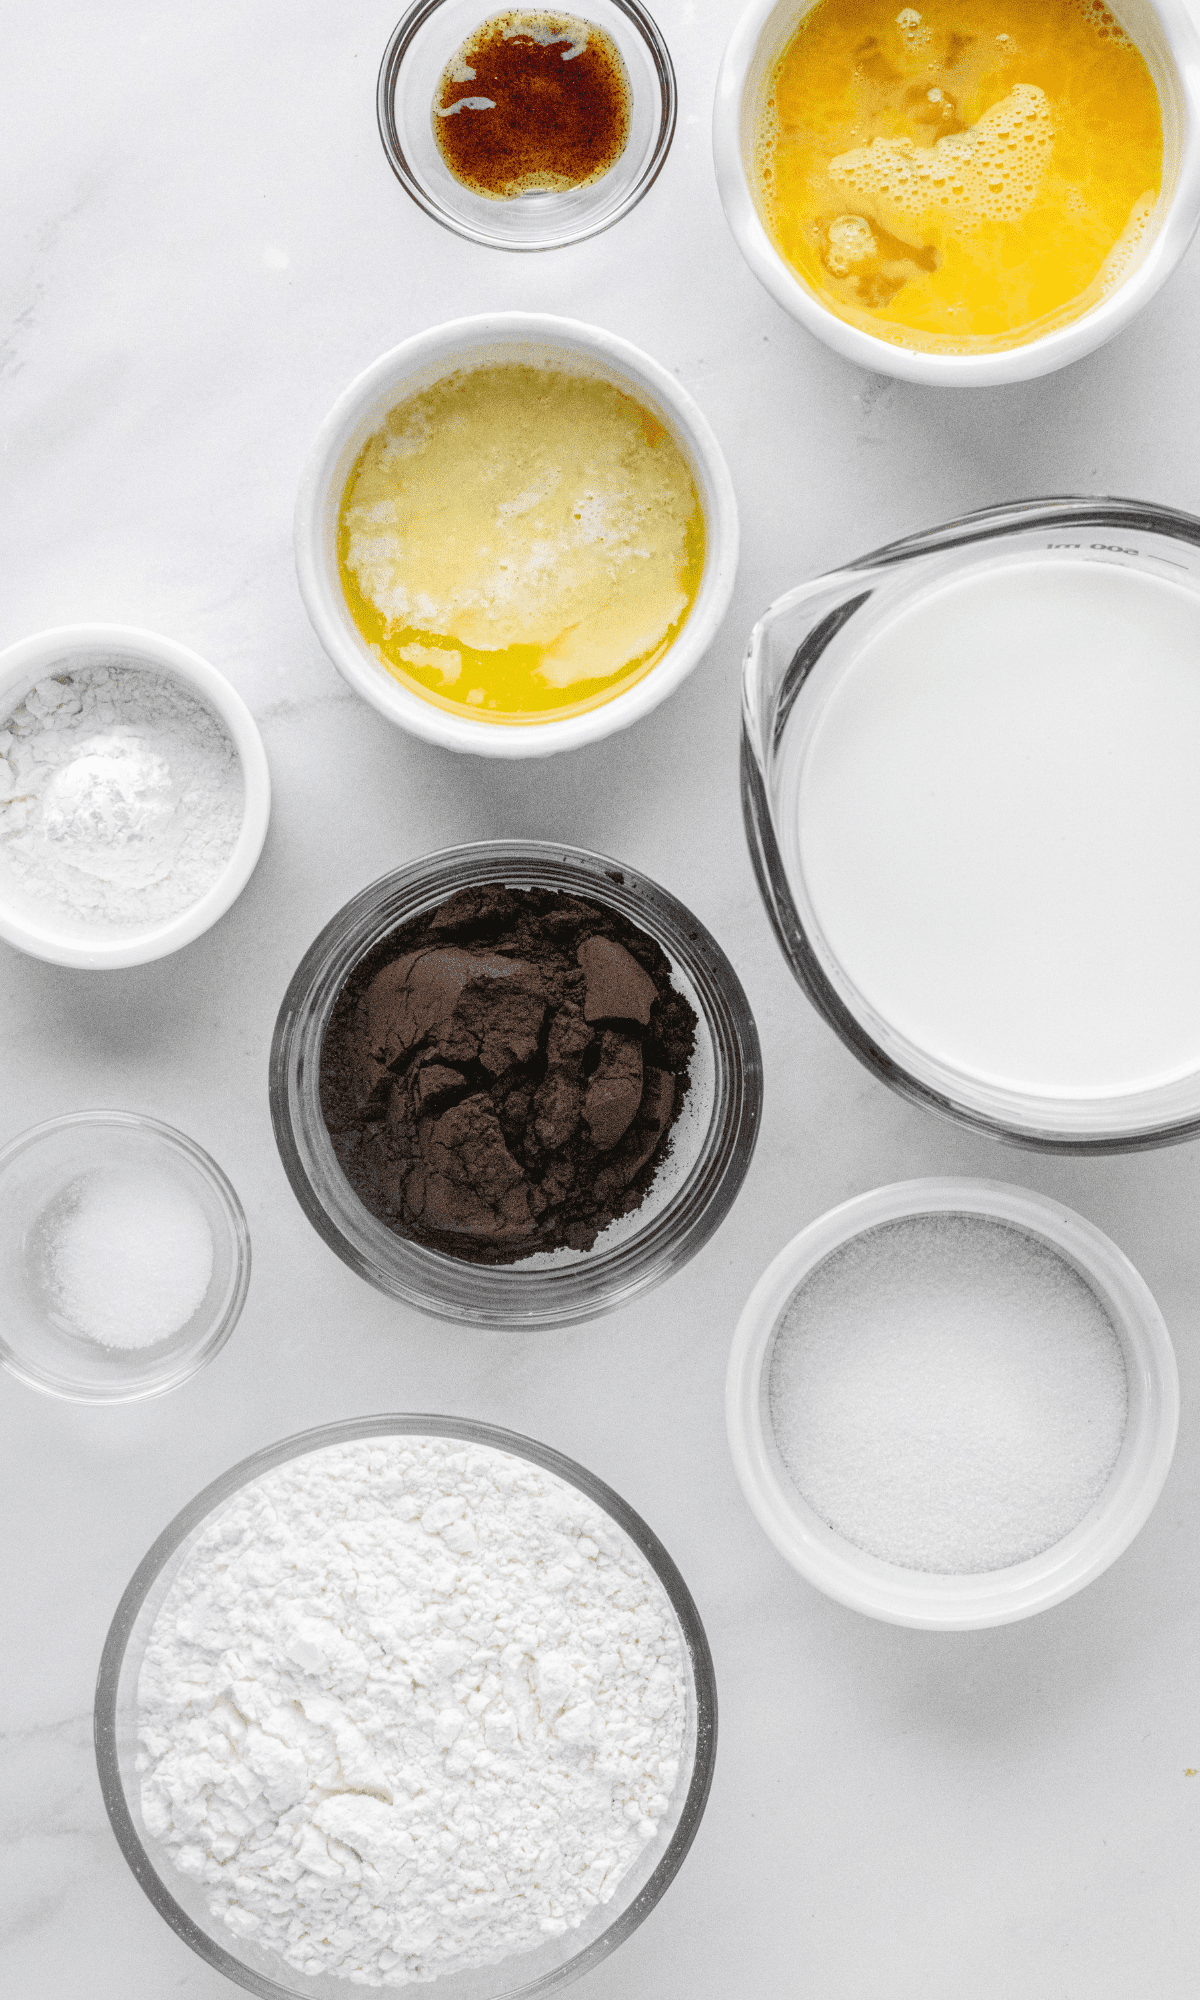 Ingredients for Chocolate Buttermilk Pancakes in varying bowl shapes and sizes.